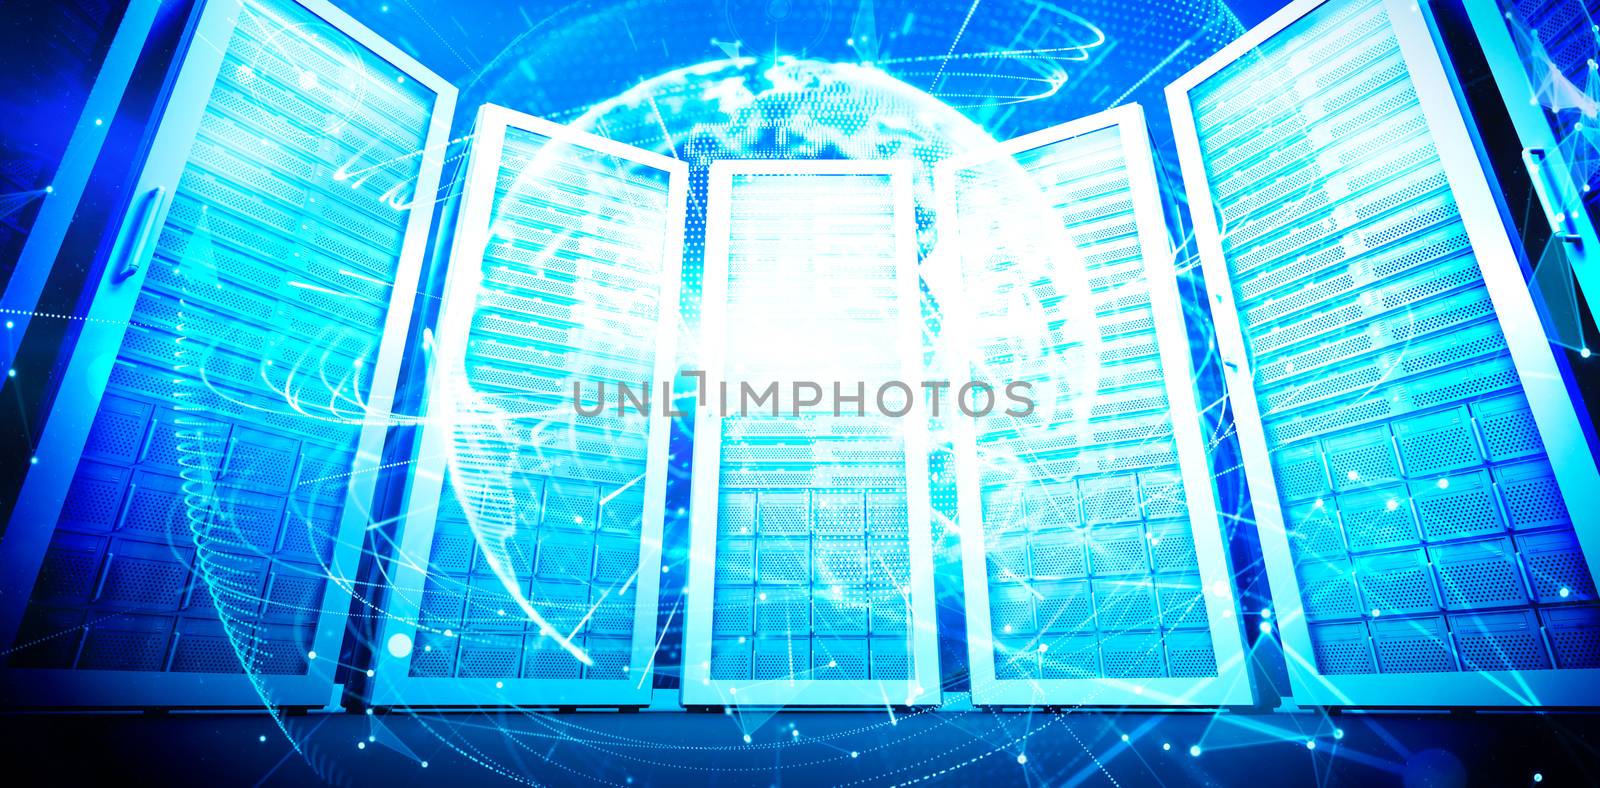 Composite image of global technology background in blue by Wavebreakmedia